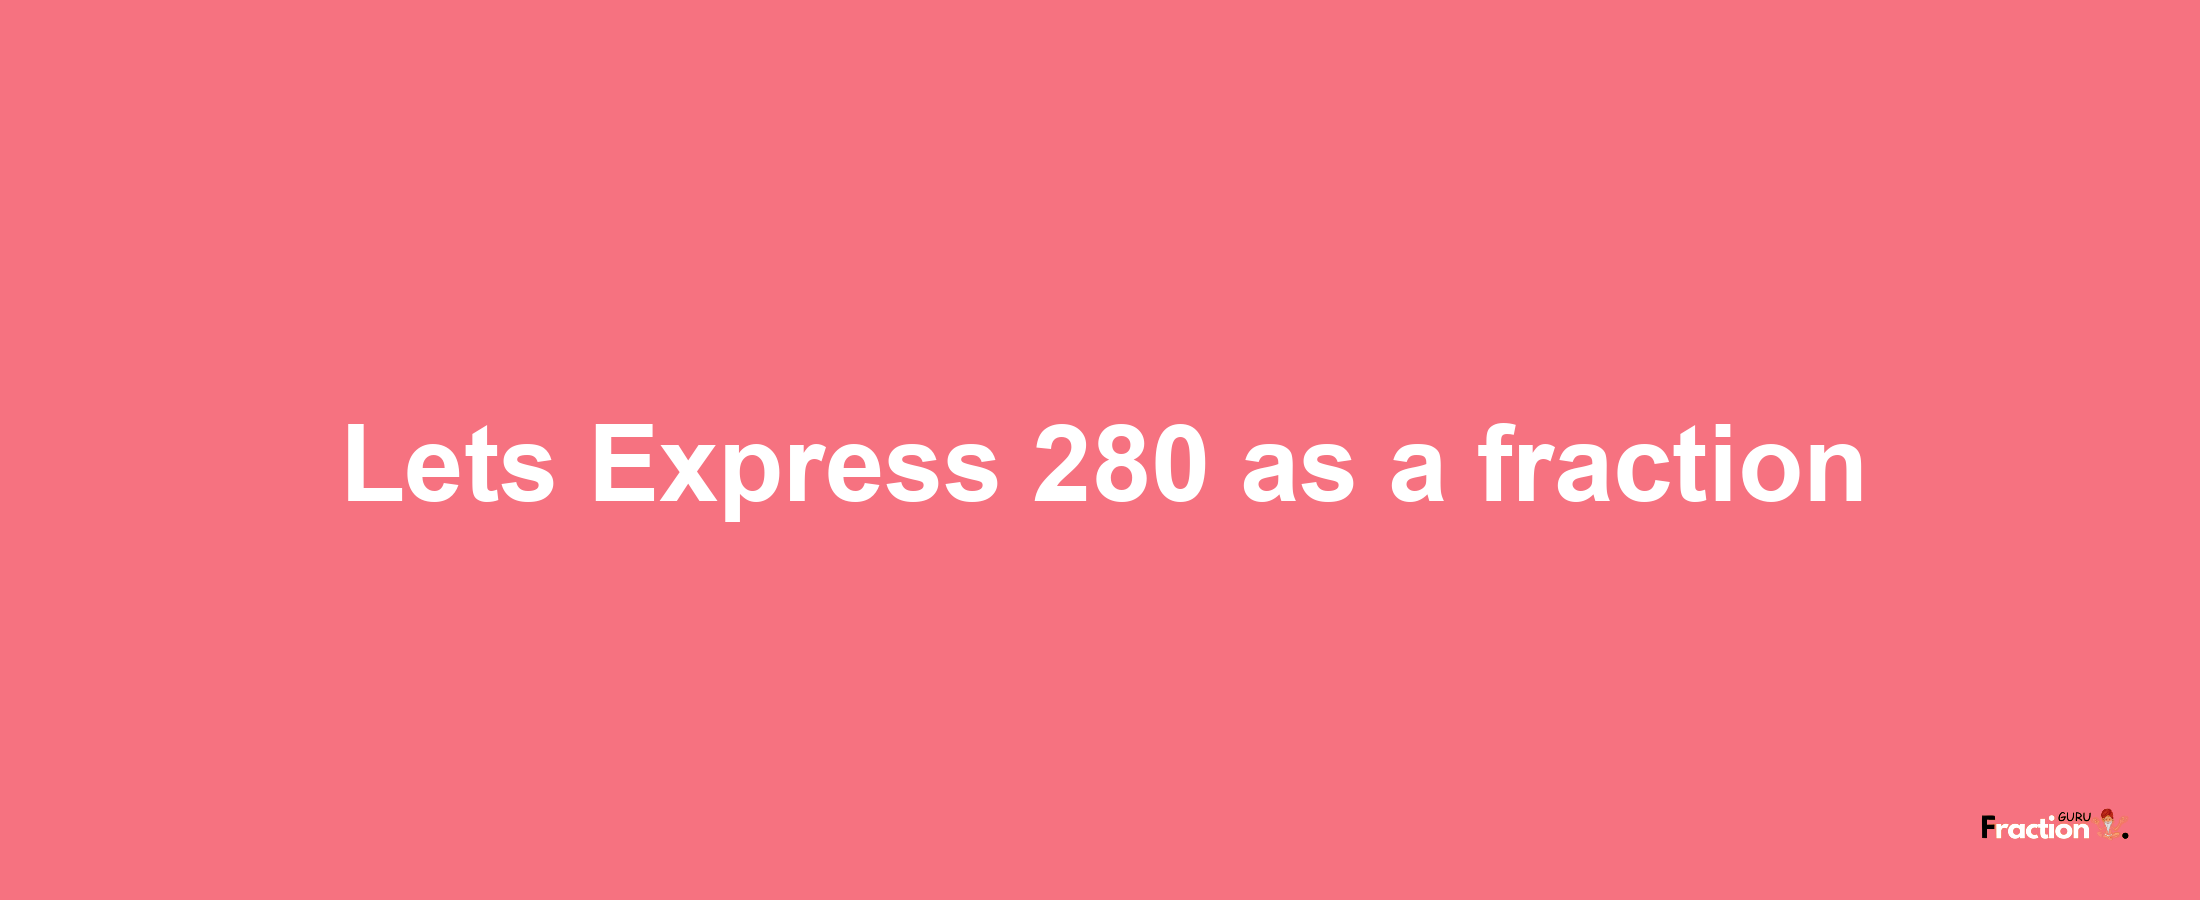 Lets Express 280 as afraction